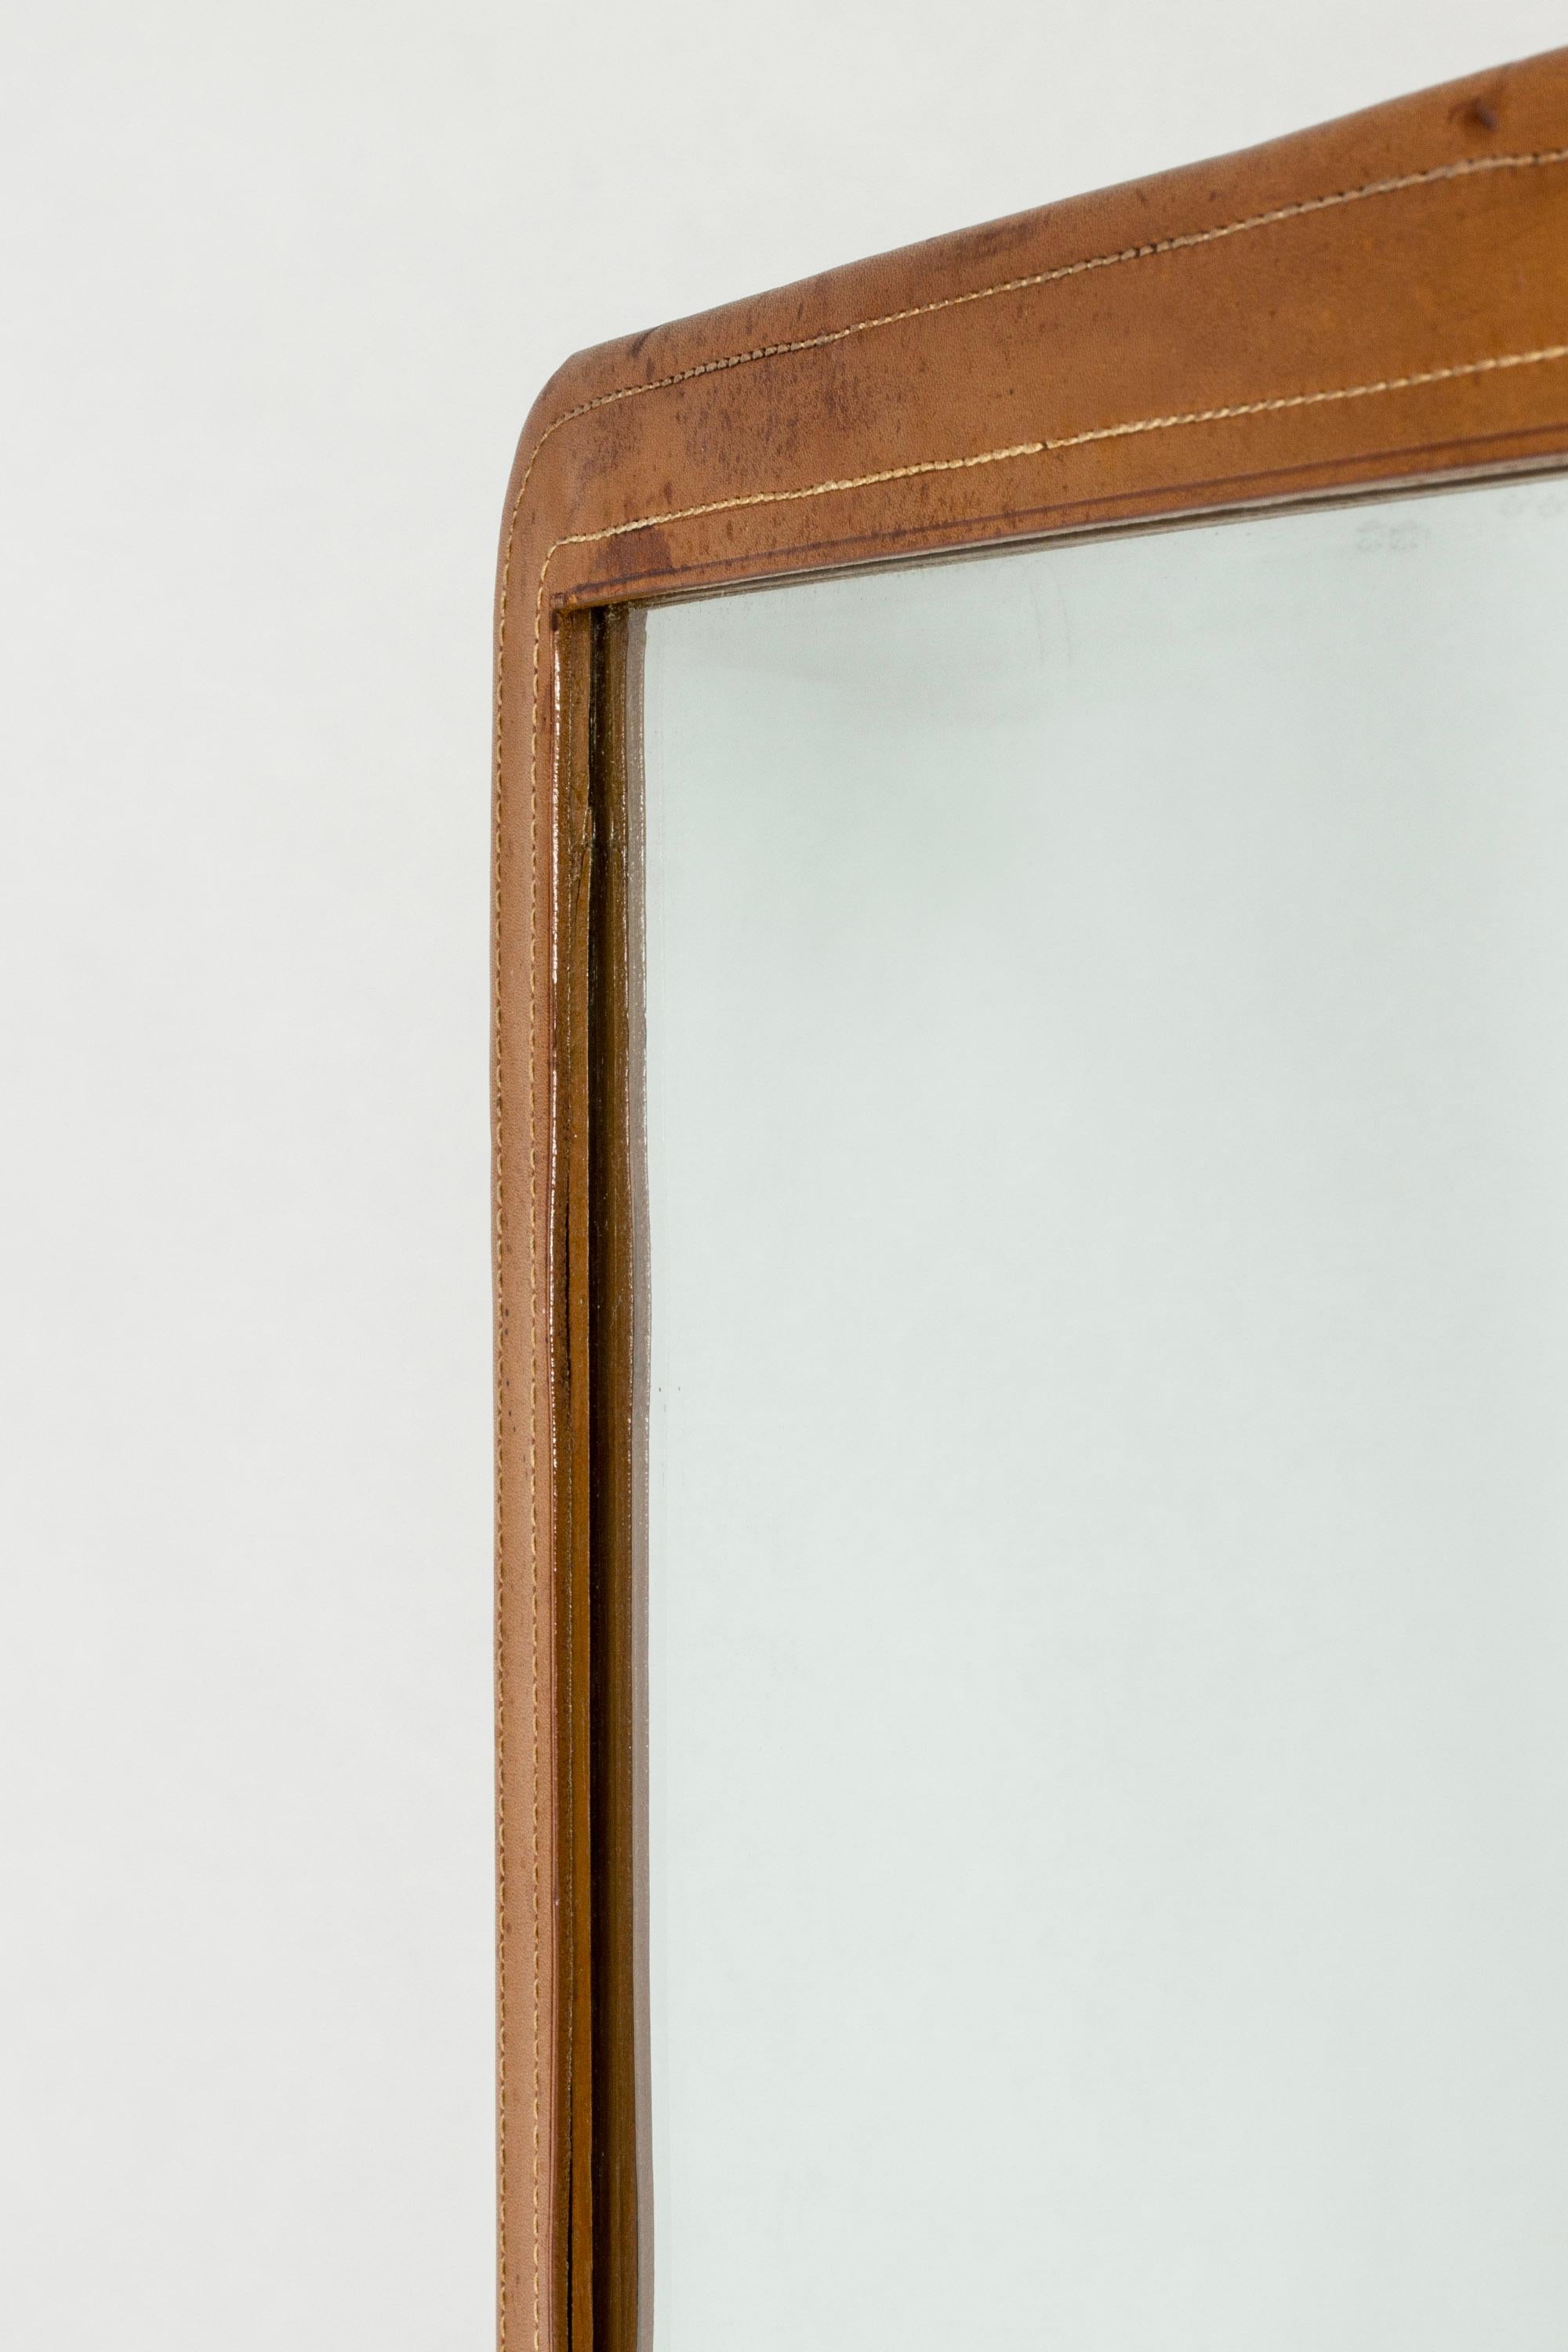 Cool vintage NK wall mirror, with frame dressed in cognac colored leather. Decorative white stitching.